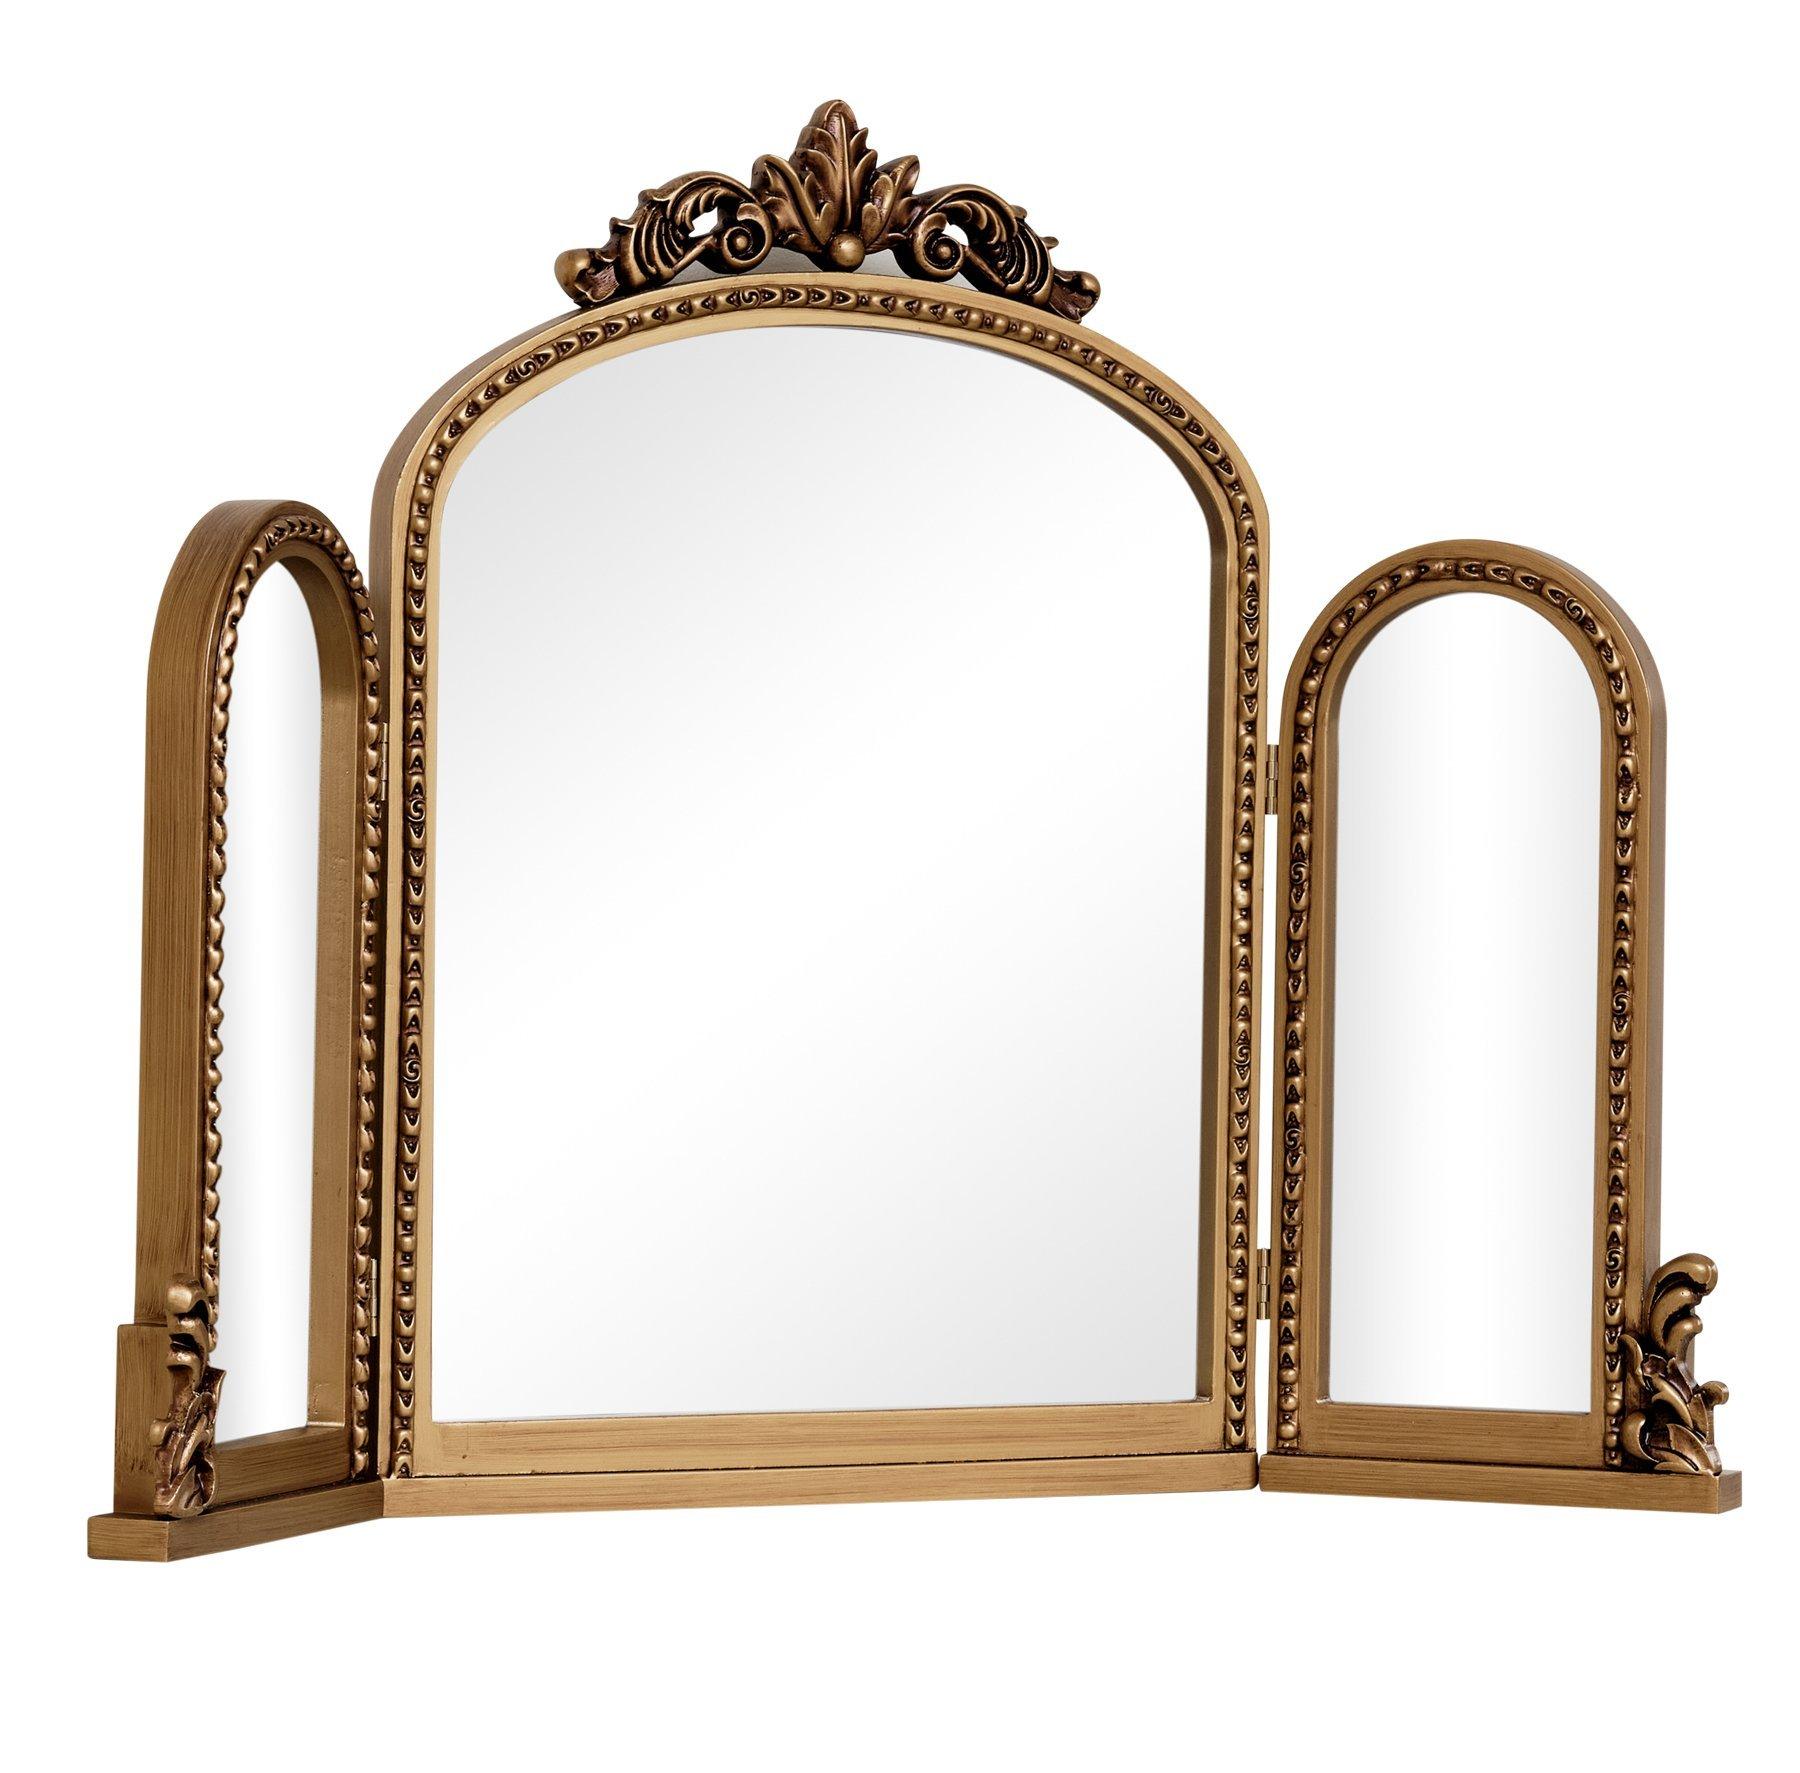 Gold Ornate Arched Triple Dressing Table Mirror 80cm X 56cm